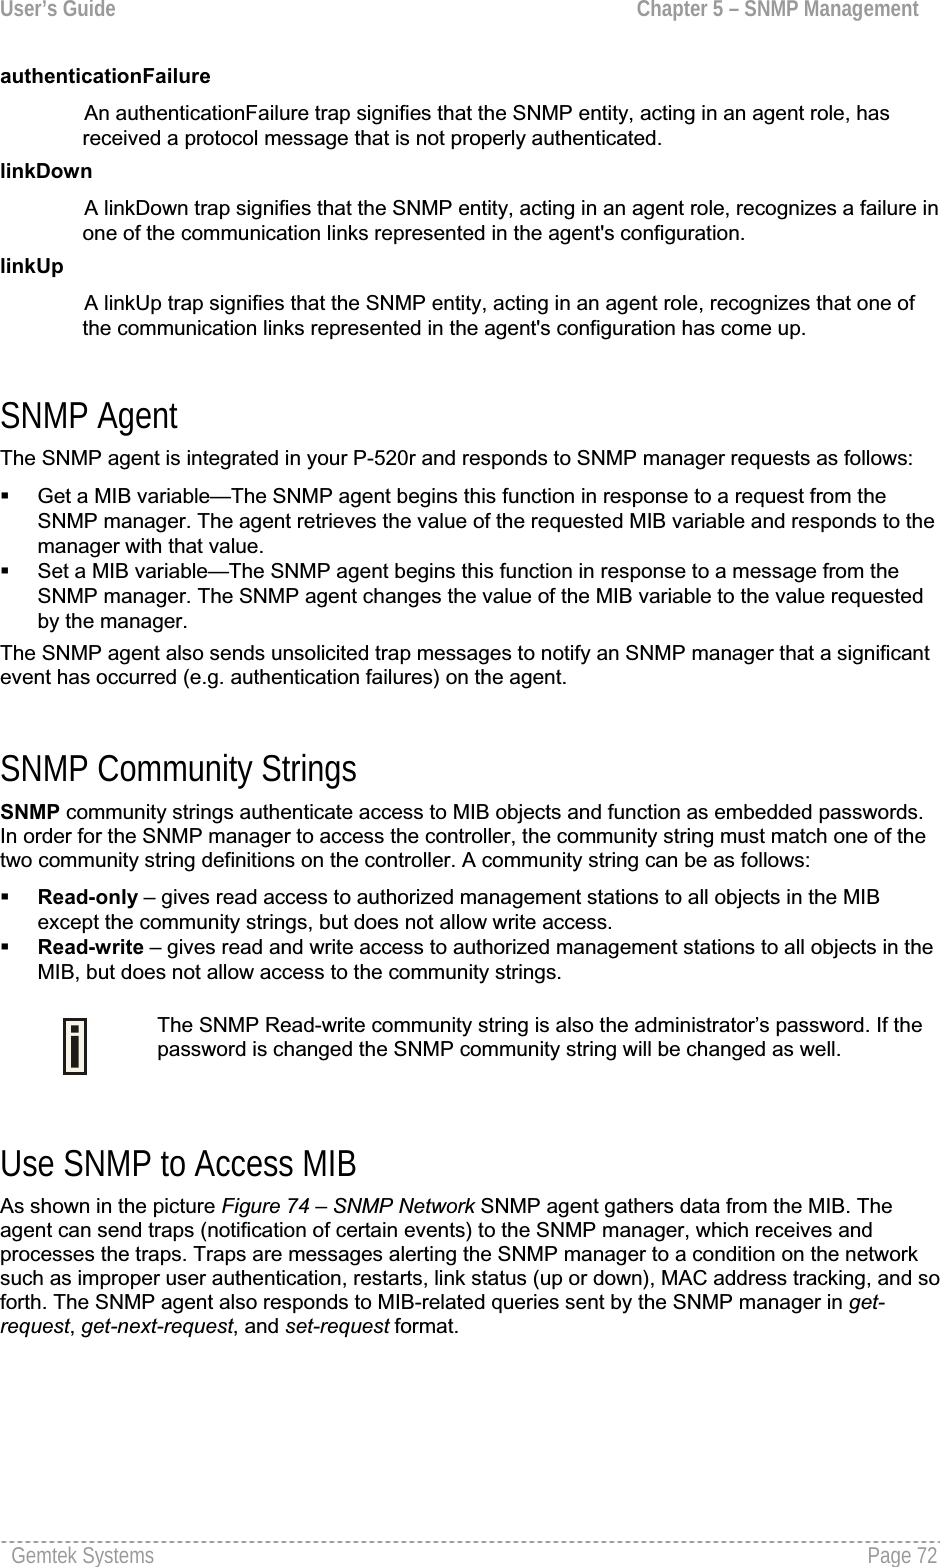 User’s Guide  Chapter 5 – SNMP ManagementauthenticationFailureAn authenticationFailure trap signifies that the SNMP entity, acting in an agent role, has received a protocol message that is not properly authenticated.linkDownA linkDown trap signifies that the SNMP entity, acting in an agent role, recognizes a failure in one of the communication links represented in the agent&apos;s configuration.linkUpA linkUp trap signifies that the SNMP entity, acting in an agent role, recognizes that one of the communication links represented in the agent&apos;s configuration has come up. SNMP Agent The SNMP agent is integrated in your P-520r and responds to SNMP manager requests as follows: Get a MIB variable—The SNMP agent begins this function in response to a request from the SNMP manager. The agent retrieves the value of the requested MIB variable and responds to the manager with that value. Set a MIB variable—The SNMP agent begins this function in response to a message from theSNMP manager. The SNMP agent changes the value of the MIB variable to the value requestedby the manager.The SNMP agent also sends unsolicited trap messages to notify an SNMP manager that a significantevent has occurred (e.g. authentication failures) on the agent. SNMP Community Strings SNMP community strings authenticate access to MIB objects and function as embedded passwords.In order for the SNMP manager to access the controller, the community string must match one of the two community string definitions on the controller. A community string can be as follows: Read-only – gives read access to authorized management stations to all objects in the MIB except the community strings, but does not allow write access.Read-write – gives read and write access to authorized management stations to all objects in the MIB, but does not allow access to the community strings.The SNMP Read-write community string is also the administrator’s password. If the password is changed the SNMP community string will be changed as well. Use SNMP to Access MIB As shown in the picture Figure 74 – SNMP Network SNMP agent gathers data from the MIB. The agent can send traps (notification of certain events) to the SNMP manager, which receives andprocesses the traps. Traps are messages alerting the SNMP manager to a condition on the networksuch as improper user authentication, restarts, link status (up or down), MAC address tracking, and so forth. The SNMP agent also responds to MIB-related queries sent by the SNMP manager in get-request,get-next-request, and set-request format.Gemtek Systems  Page 72